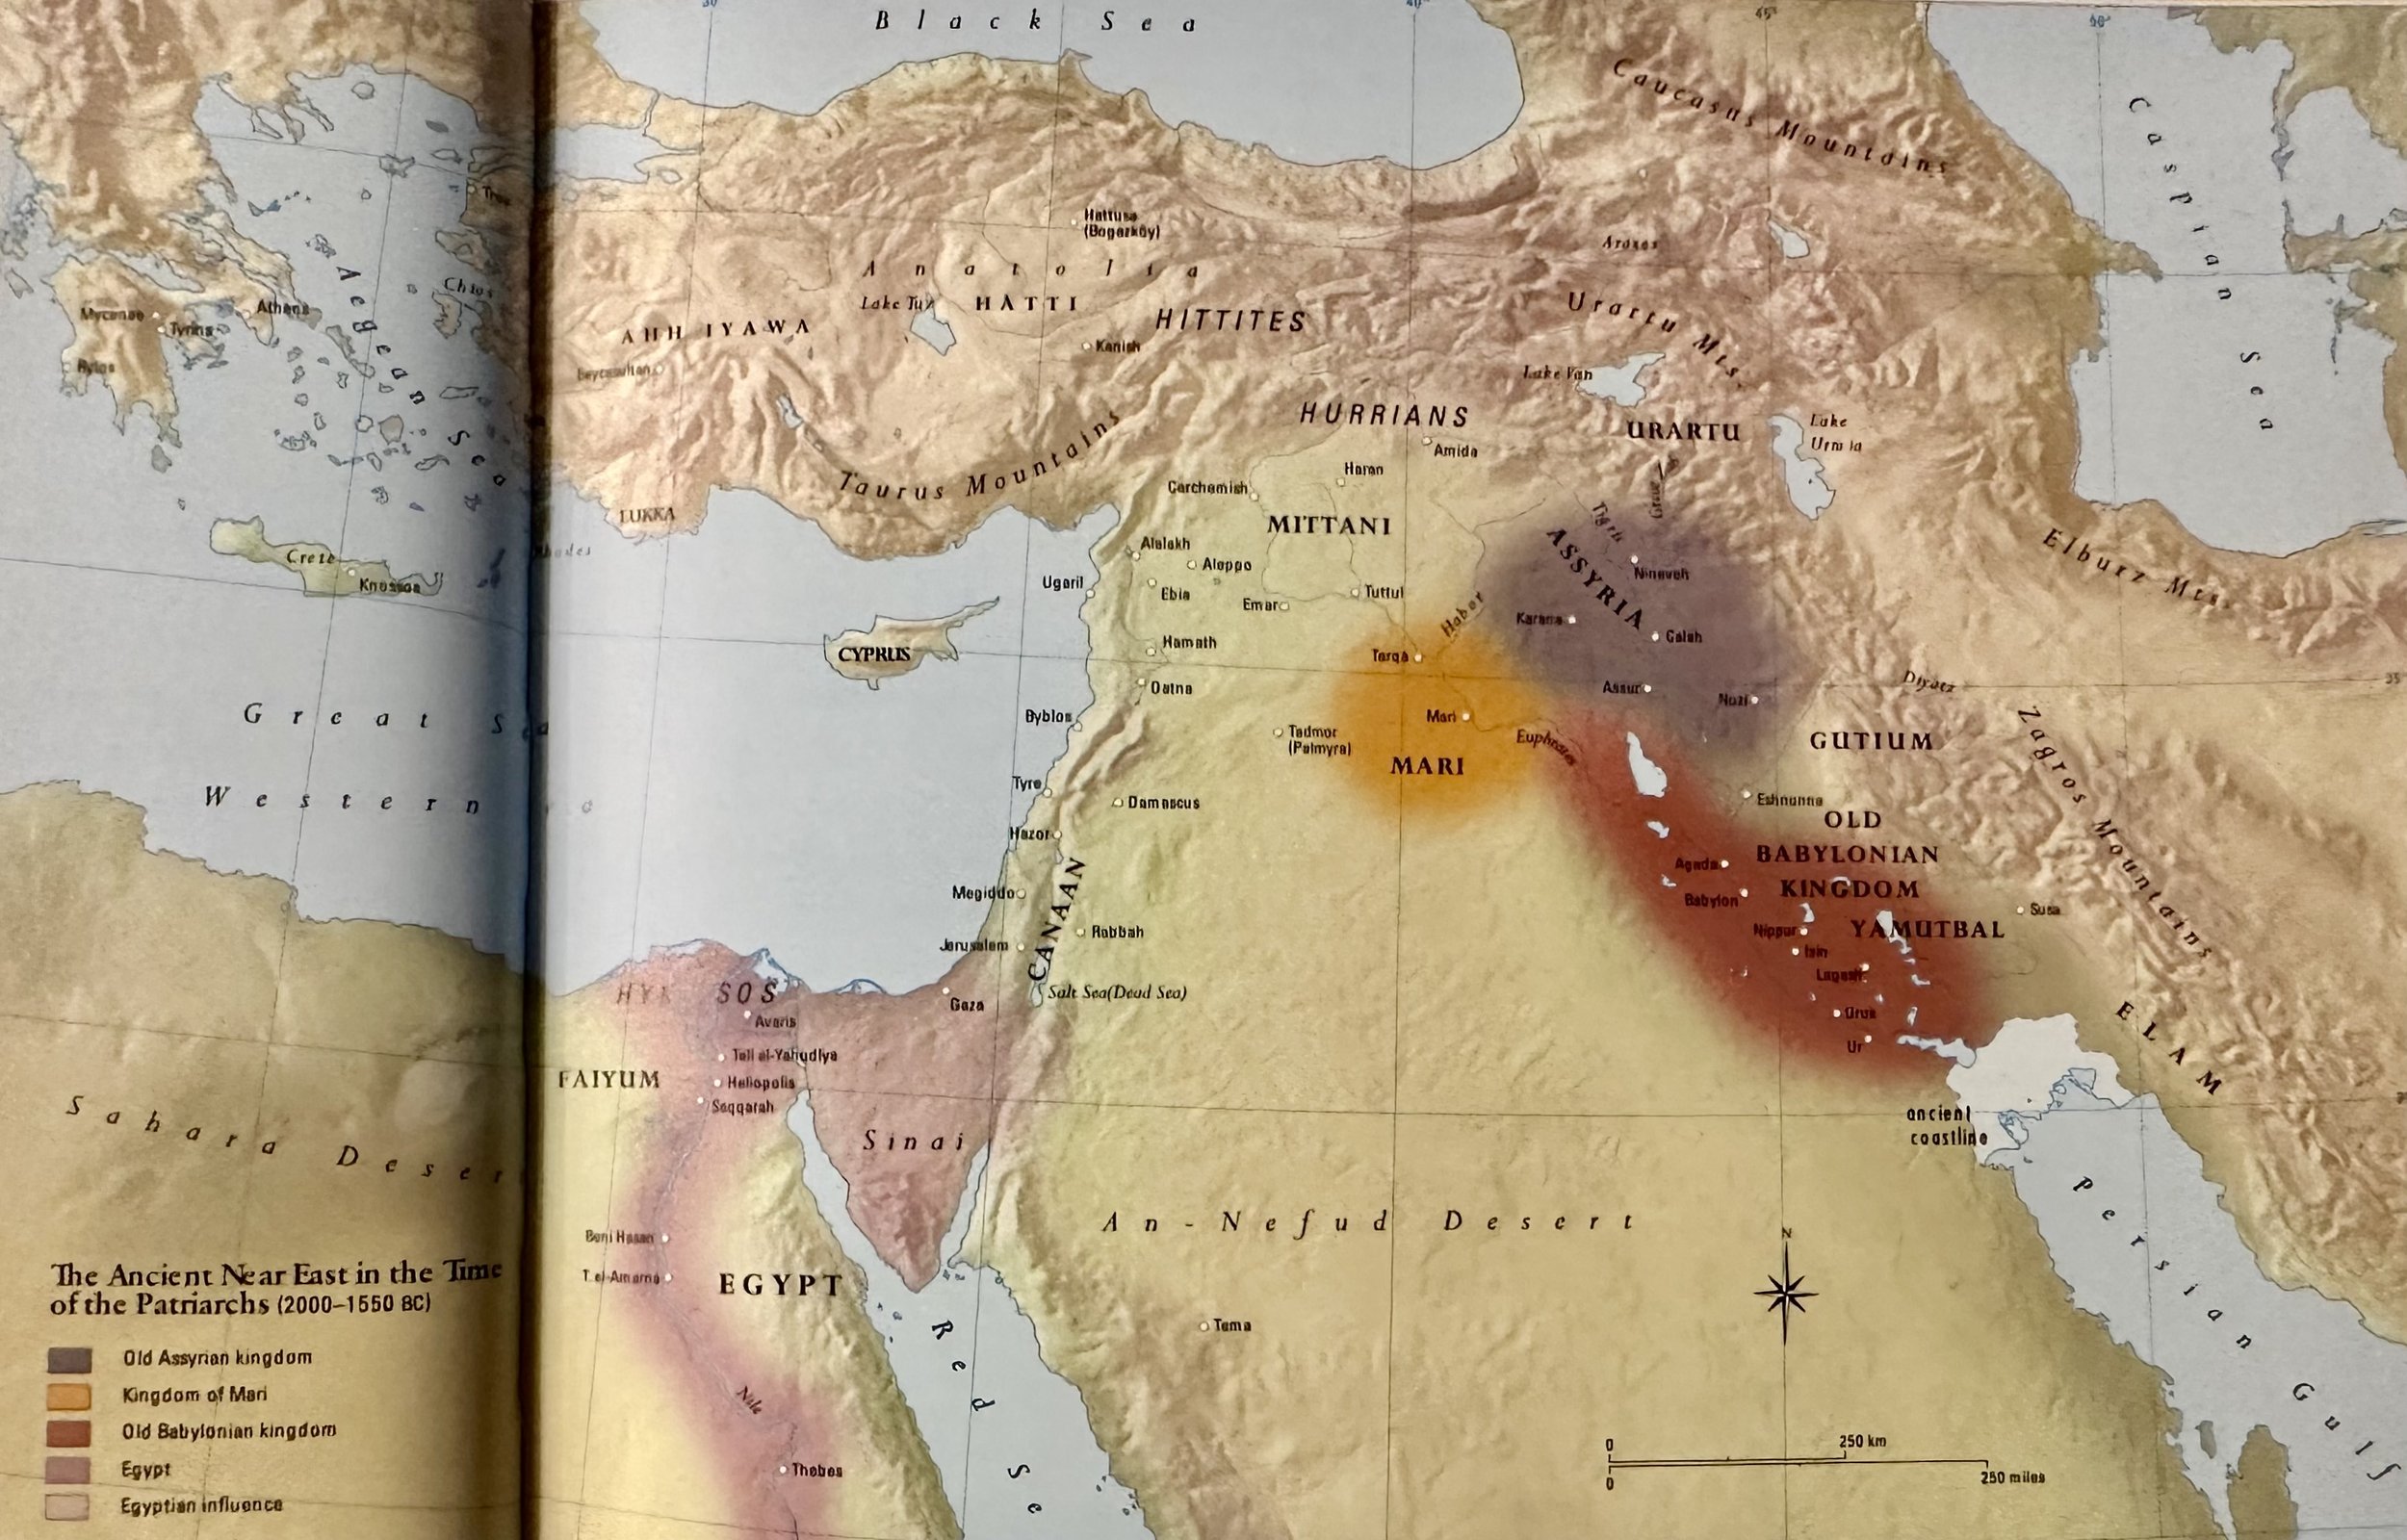 2000-150 BCE The Ancient Near East in the Time of the Patriarchs Atlas of the Bible.jpeg